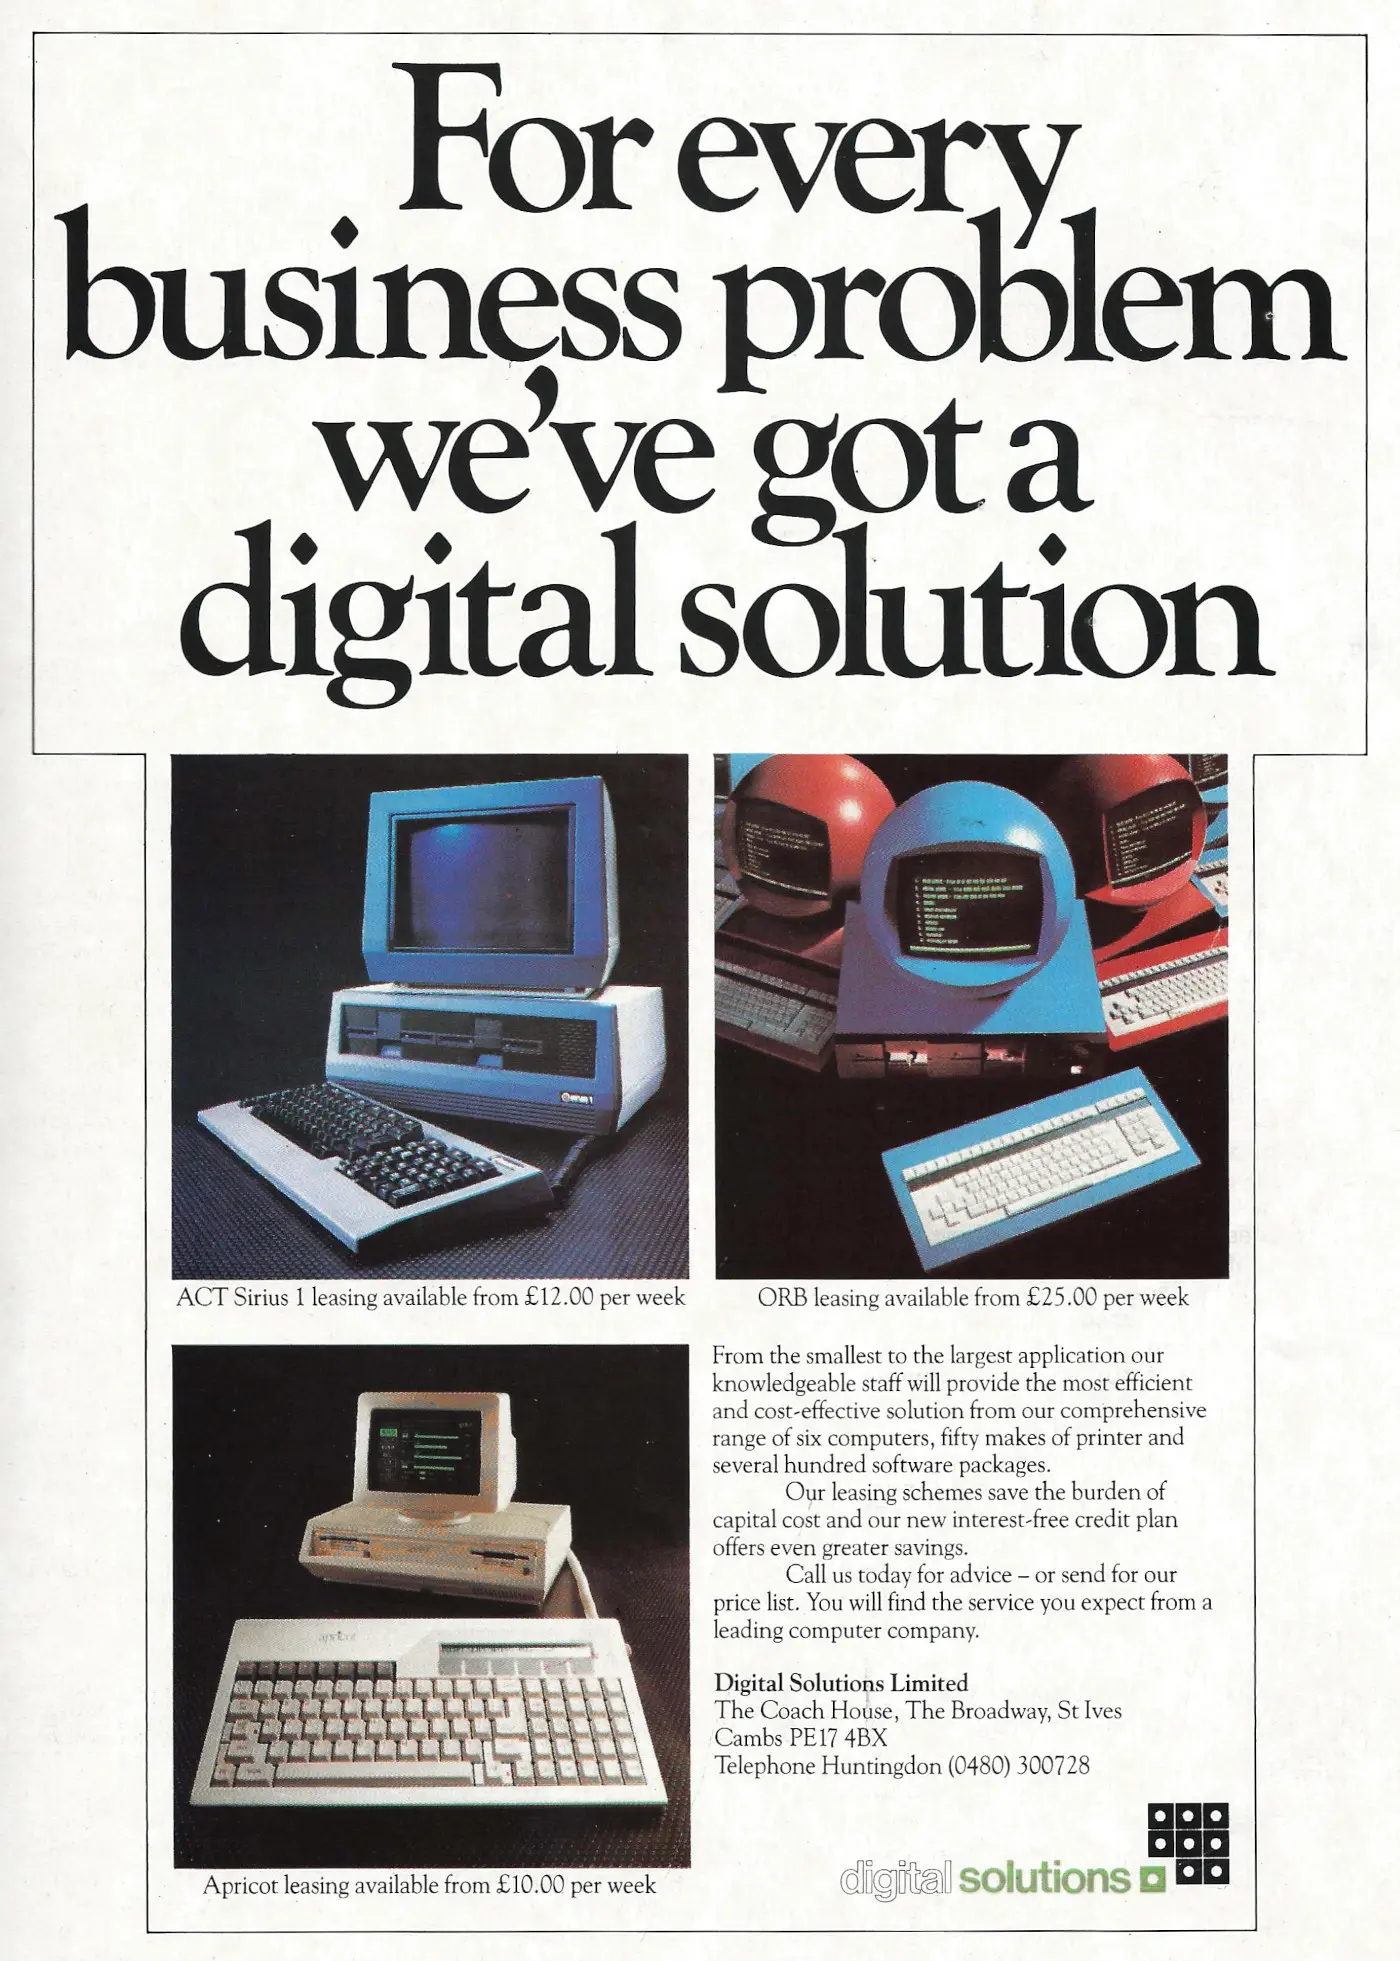 Orb Micro Advert: The ORB Microcomputer from ABS Computers, from Personal Computer World, March 1984